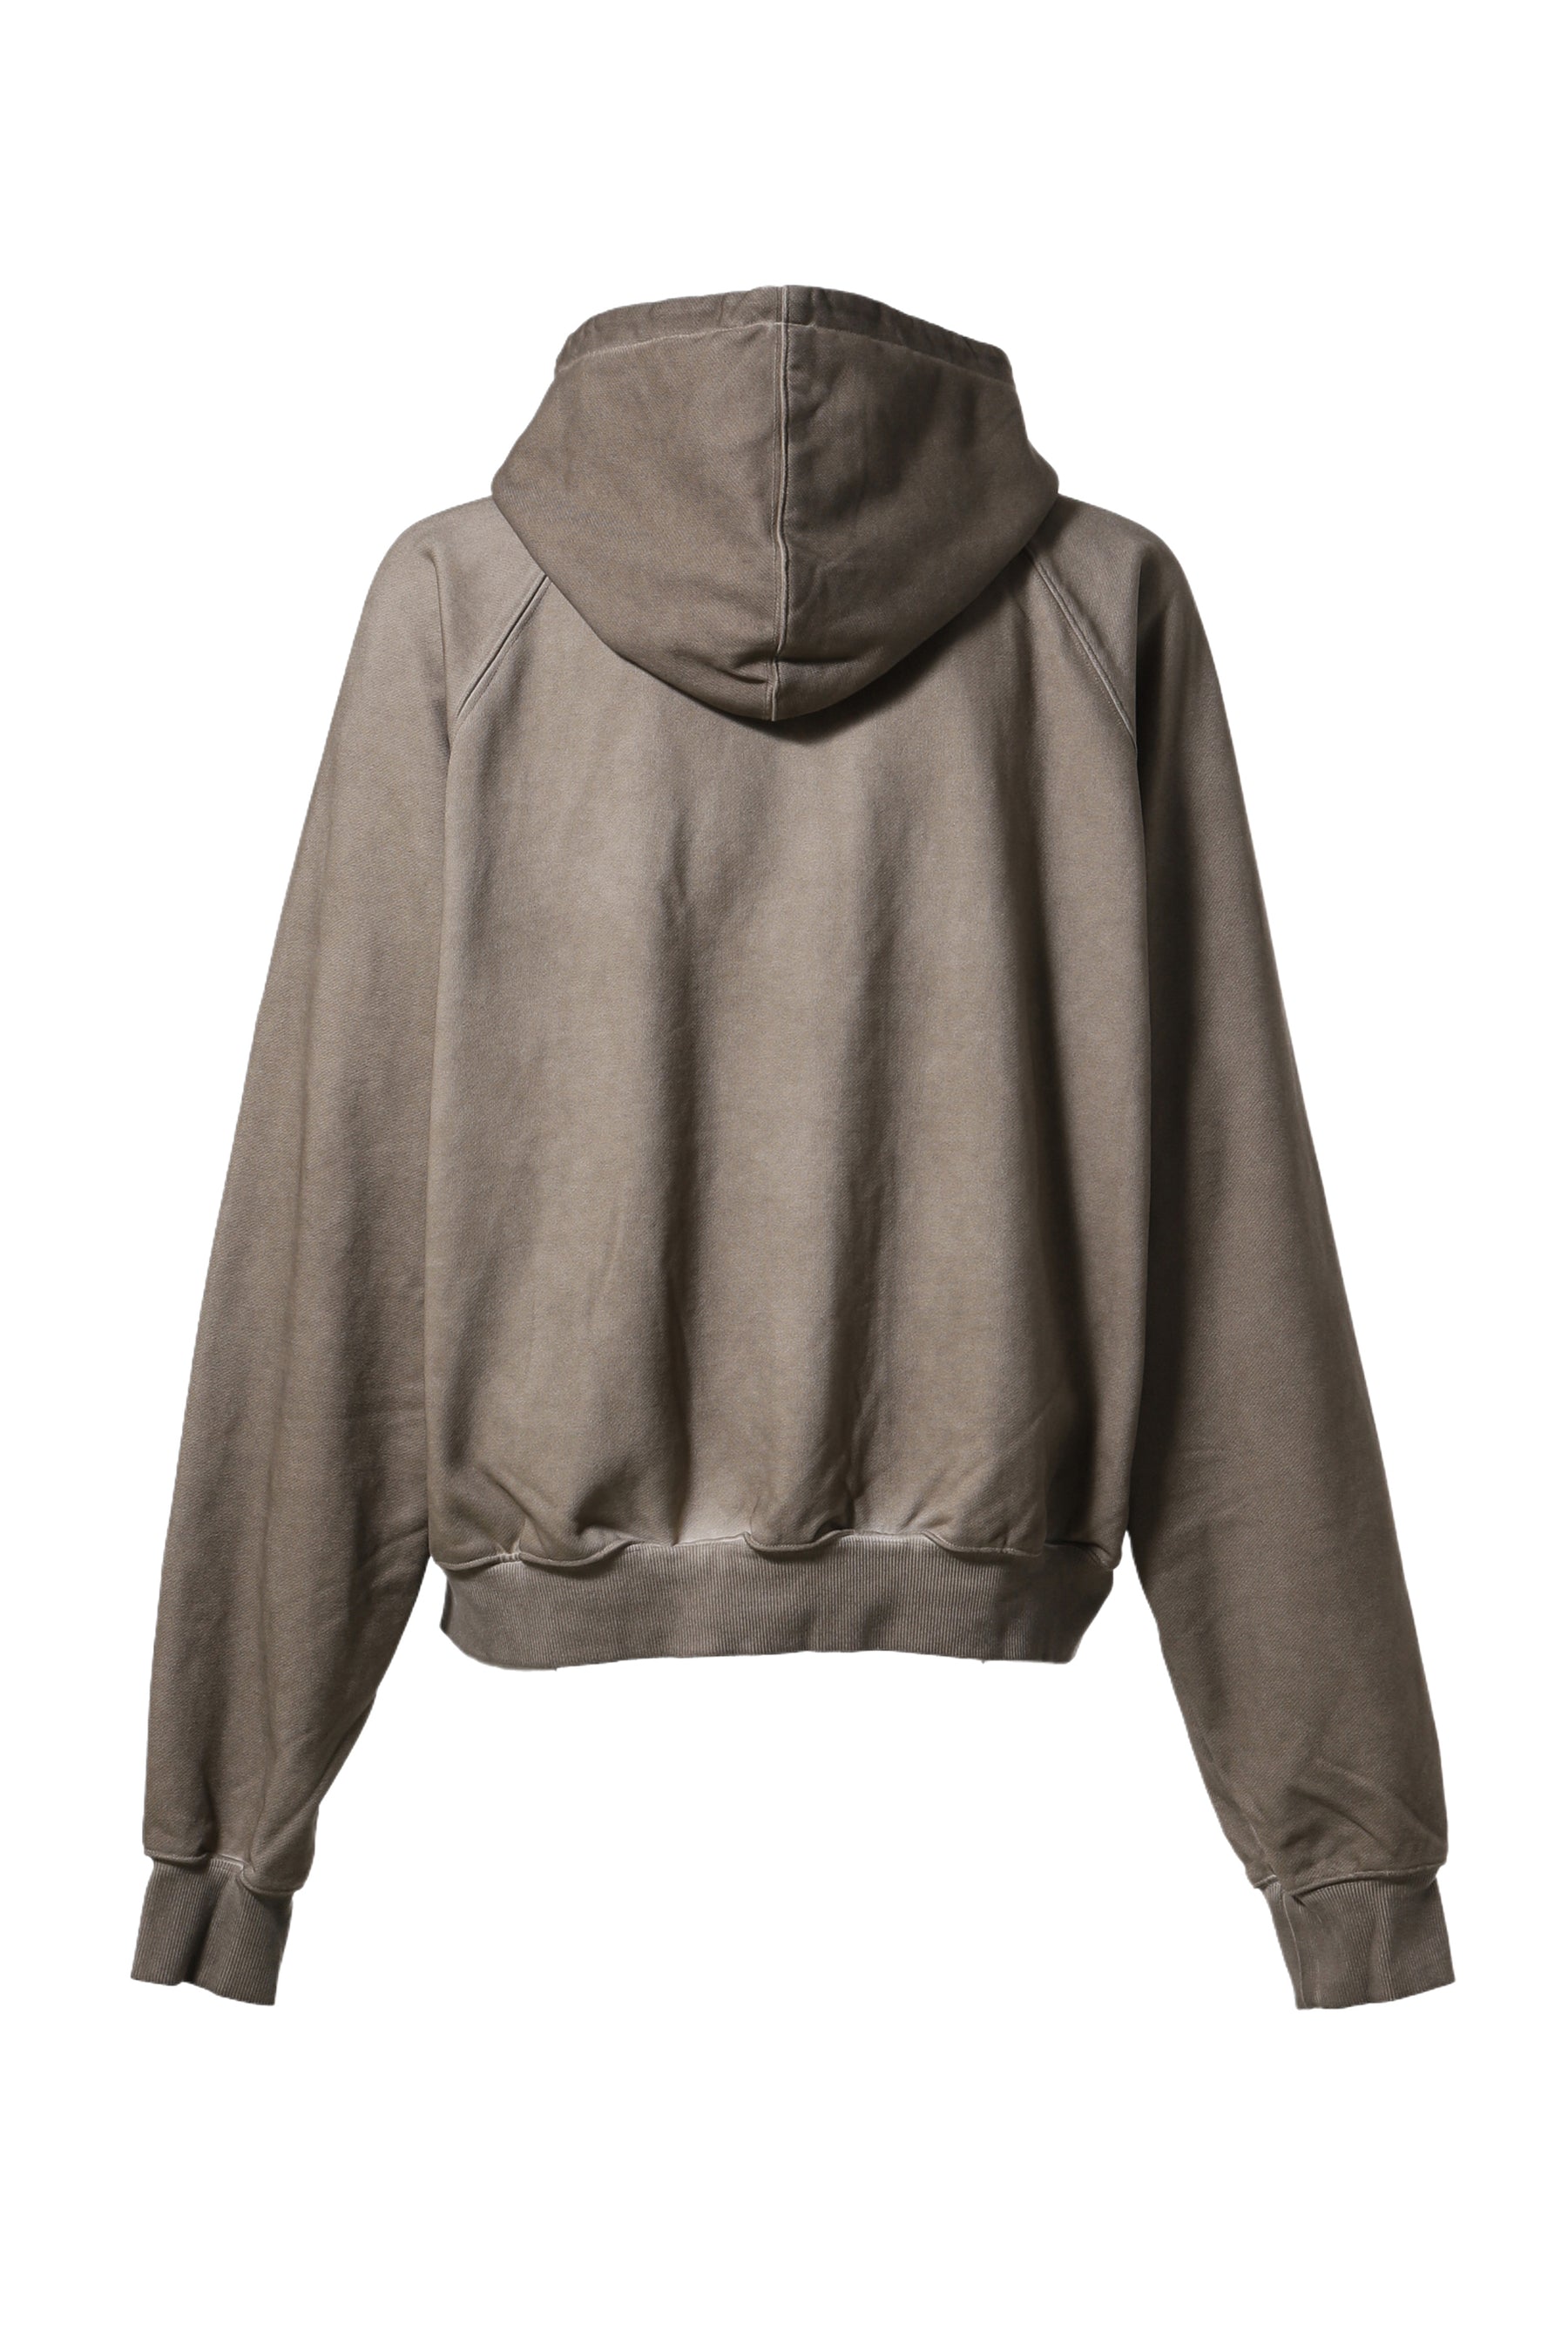 EVERY ZIP JACKET (EXCLUSIVE) / GRY SUN FADED